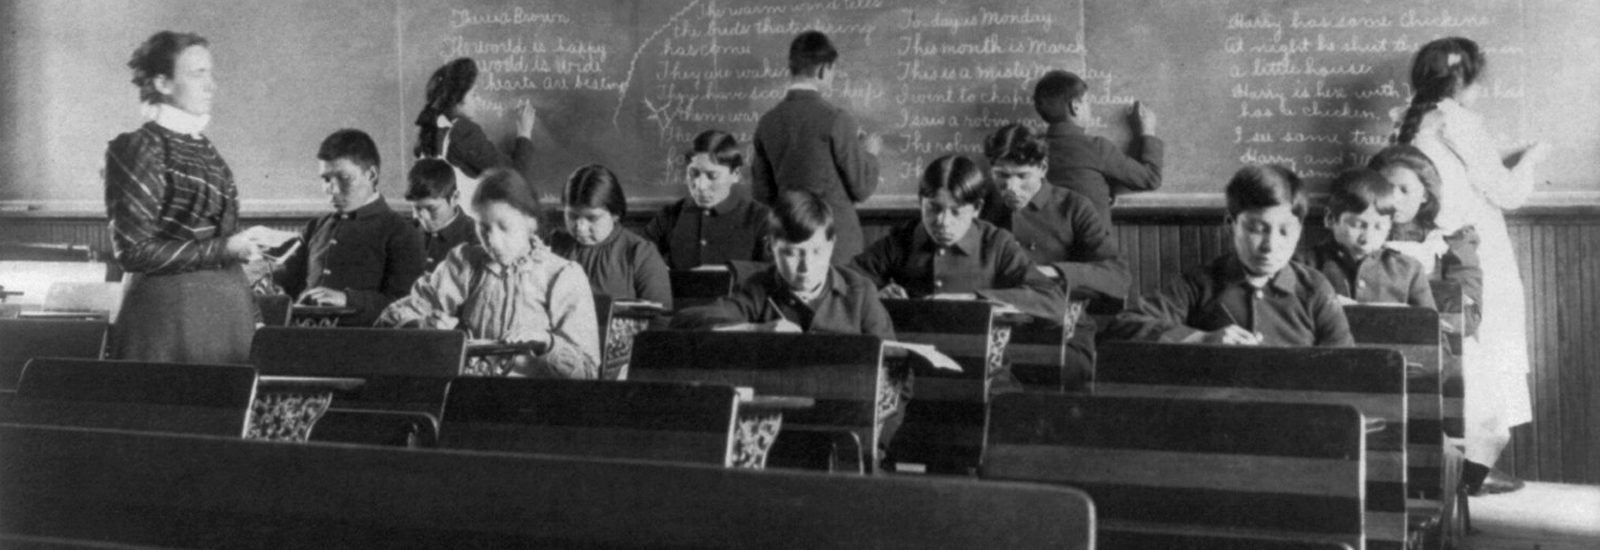 Students in an English class, some seated and some writing on a chalkboard